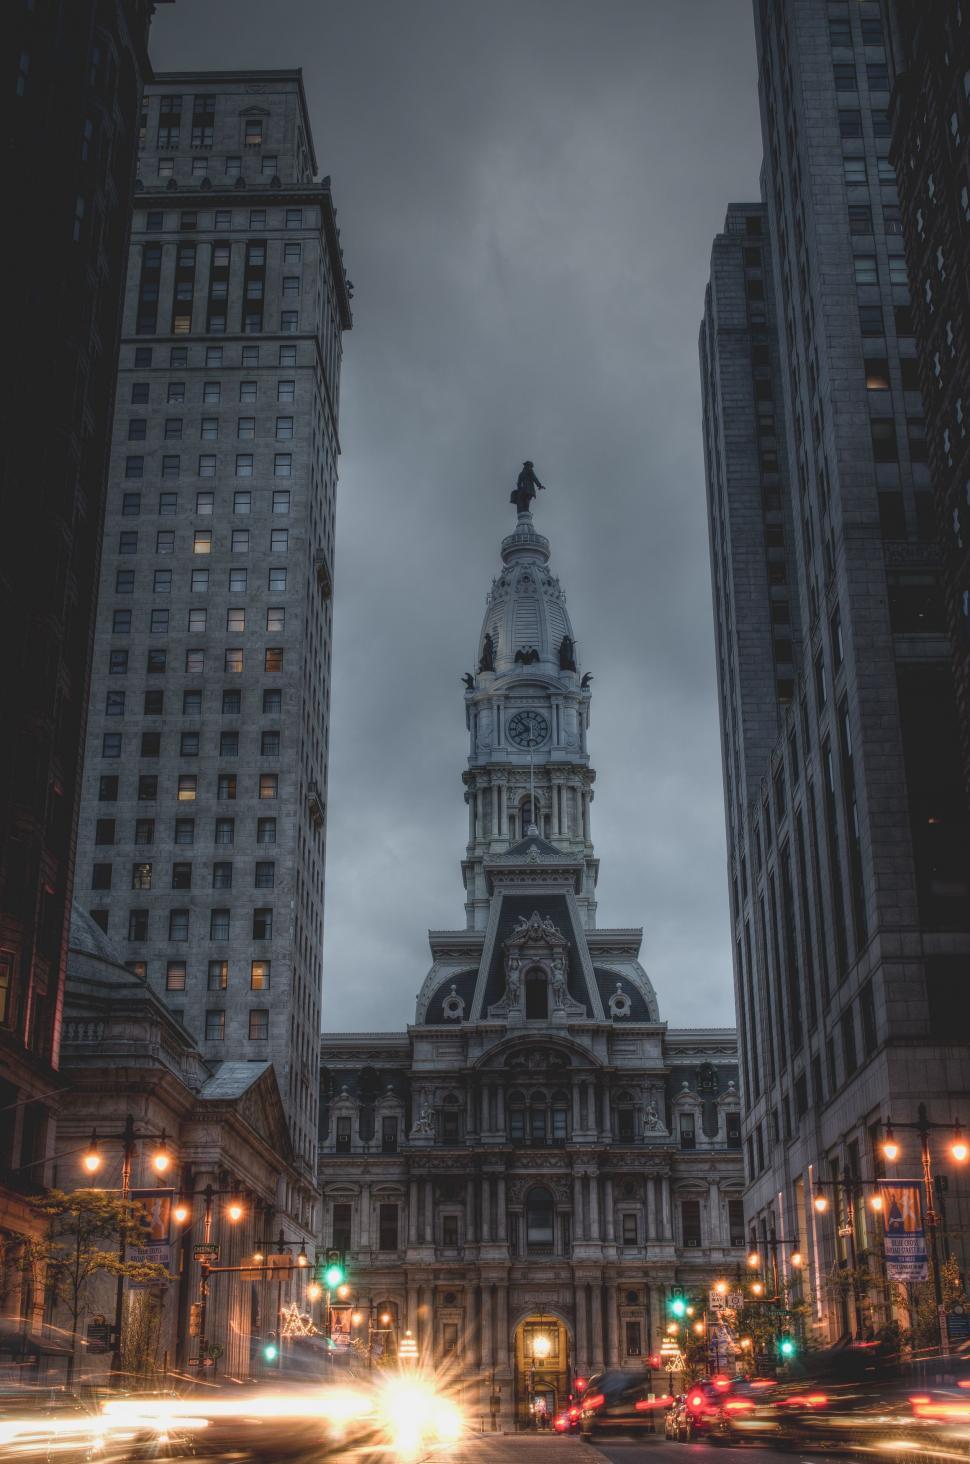 Free Image of Towering Building With Central Clock Tower 